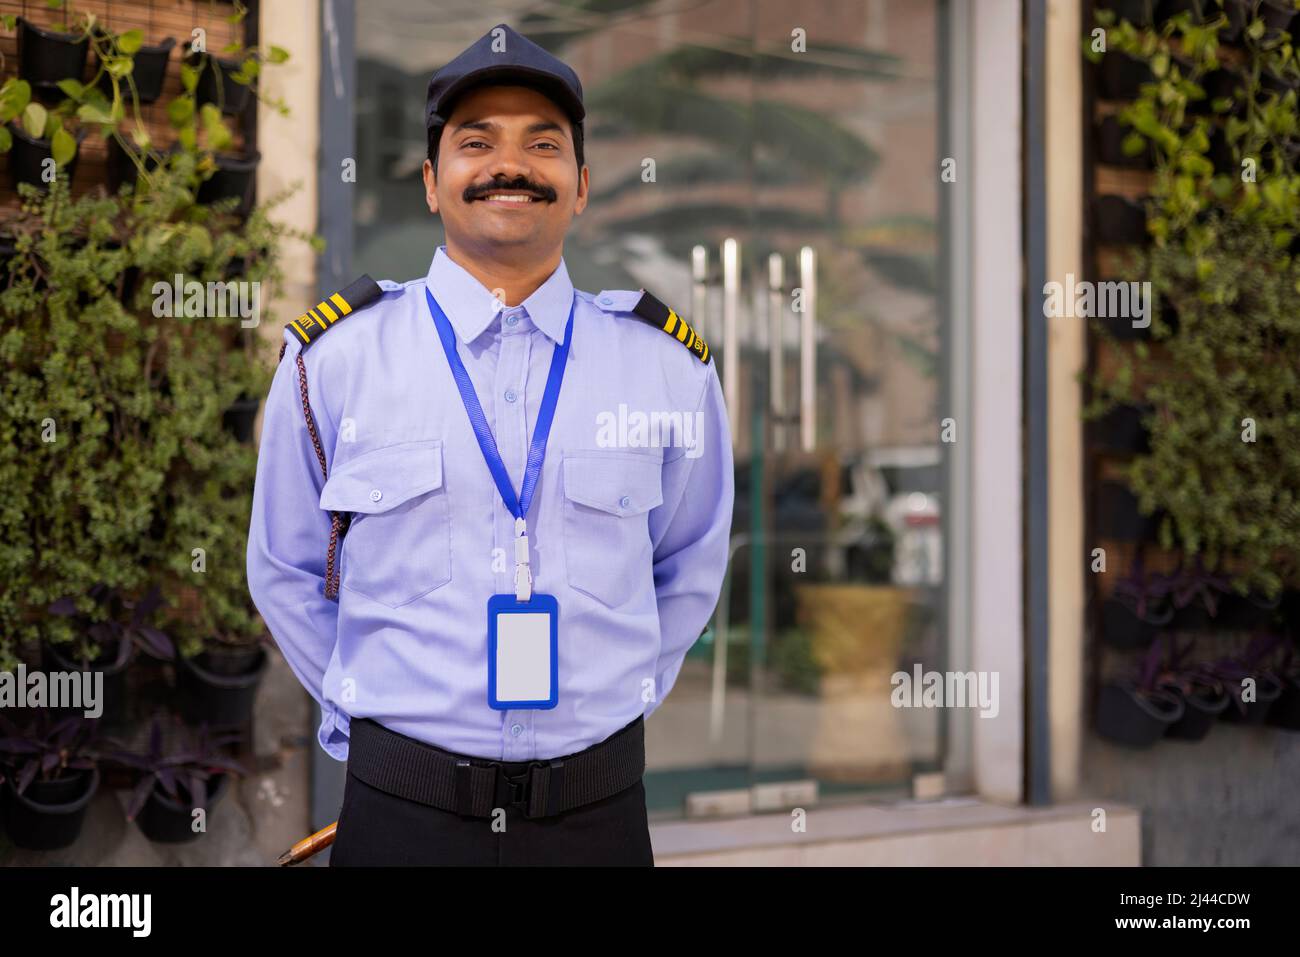 Portrait of security guard with hands behind back while working at gate Stock Photo